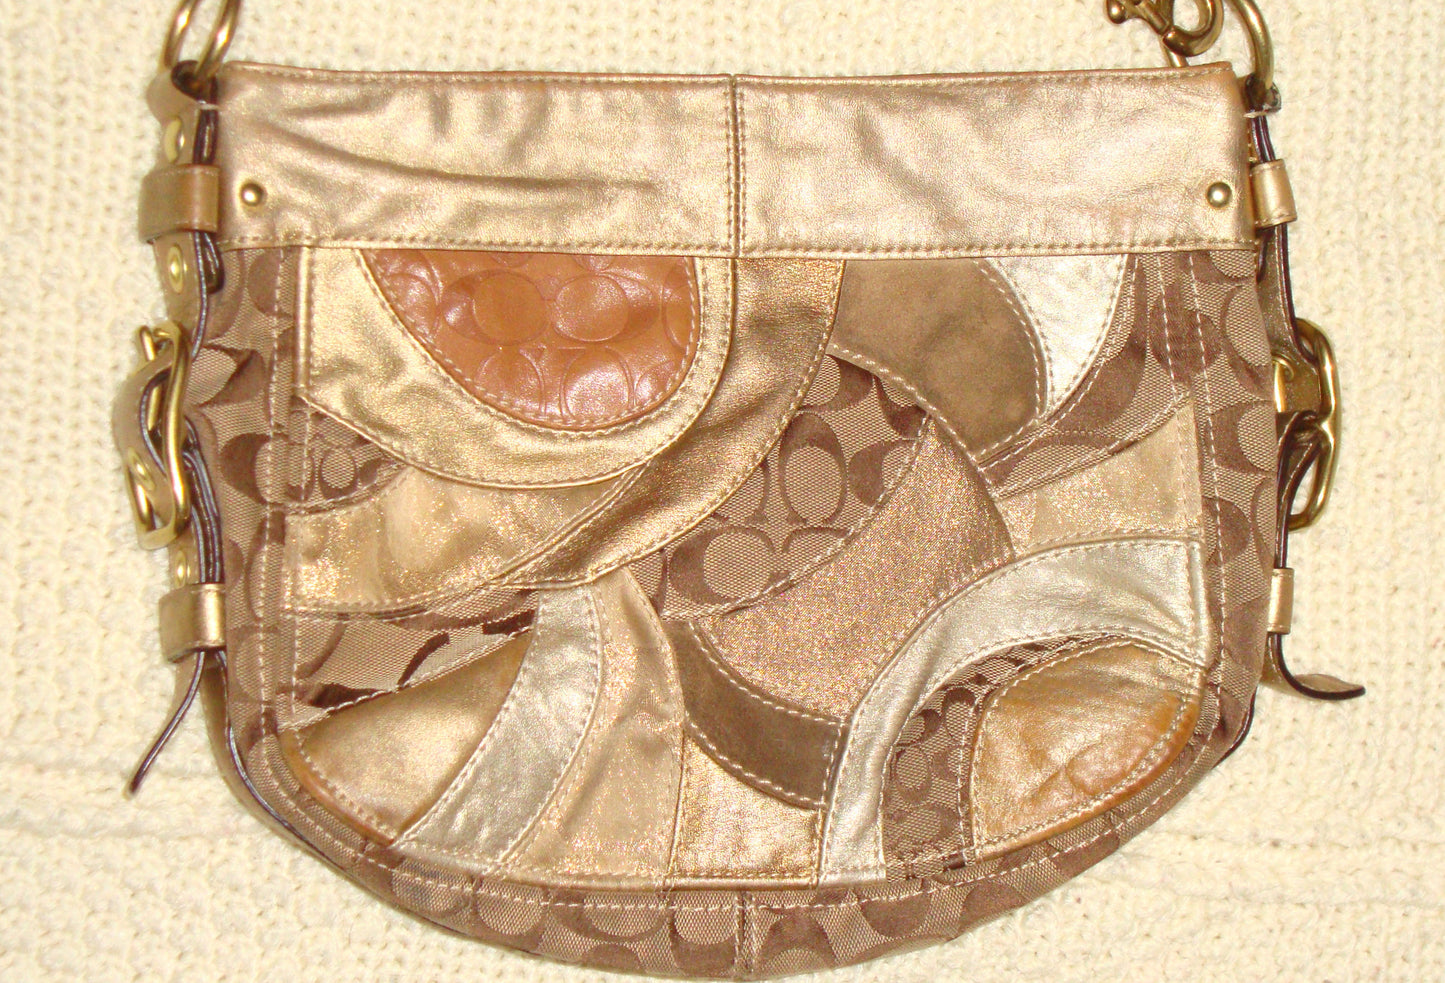 COACH GOLD LEATHER SUEDE PATCHWORK BAG PURSE